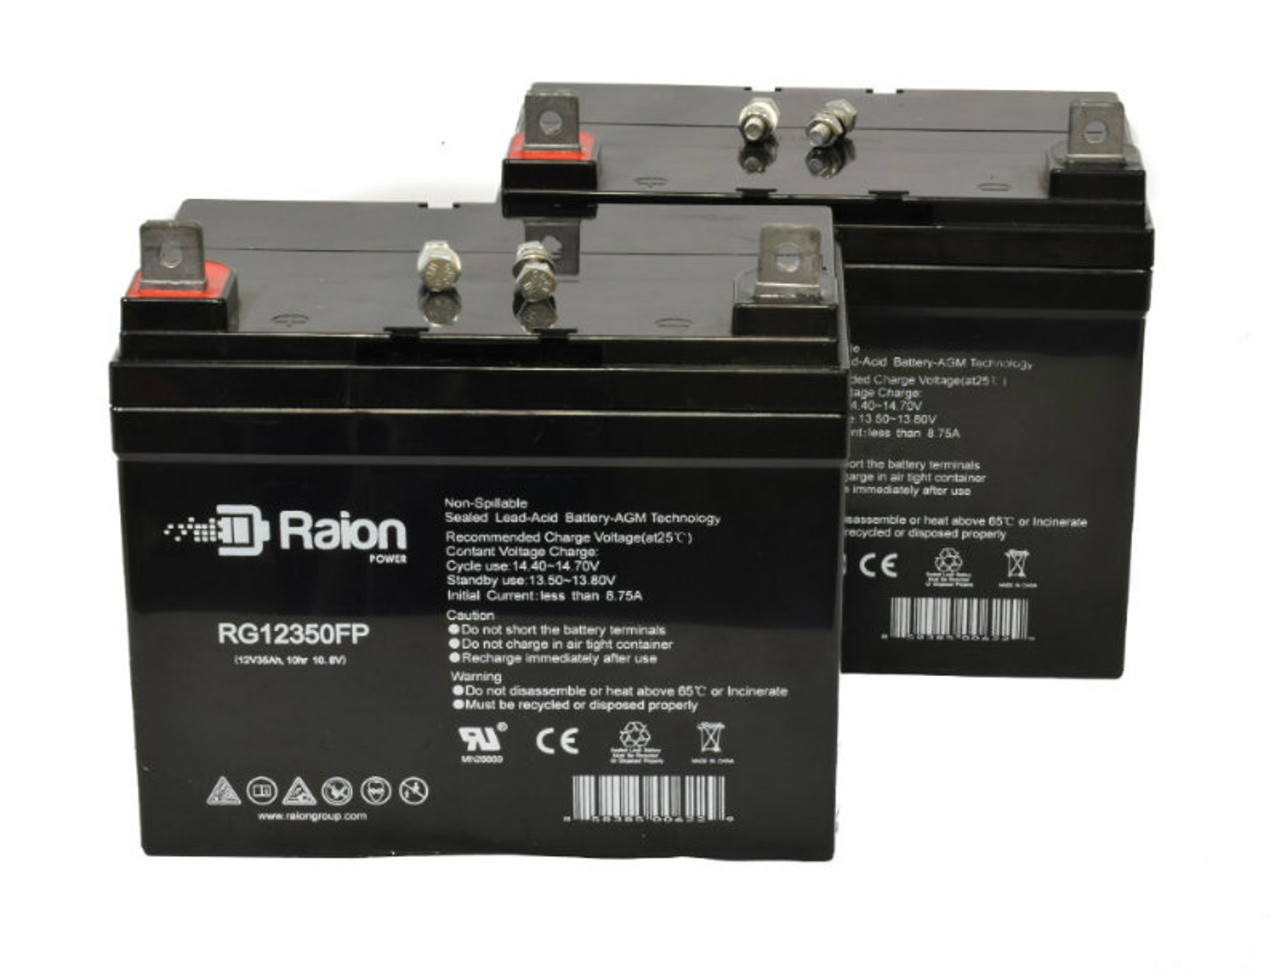 Raion Power Replacement 12V 35Ah Lawn Mower Battery for Agco Allis 1720H - 2 Pack